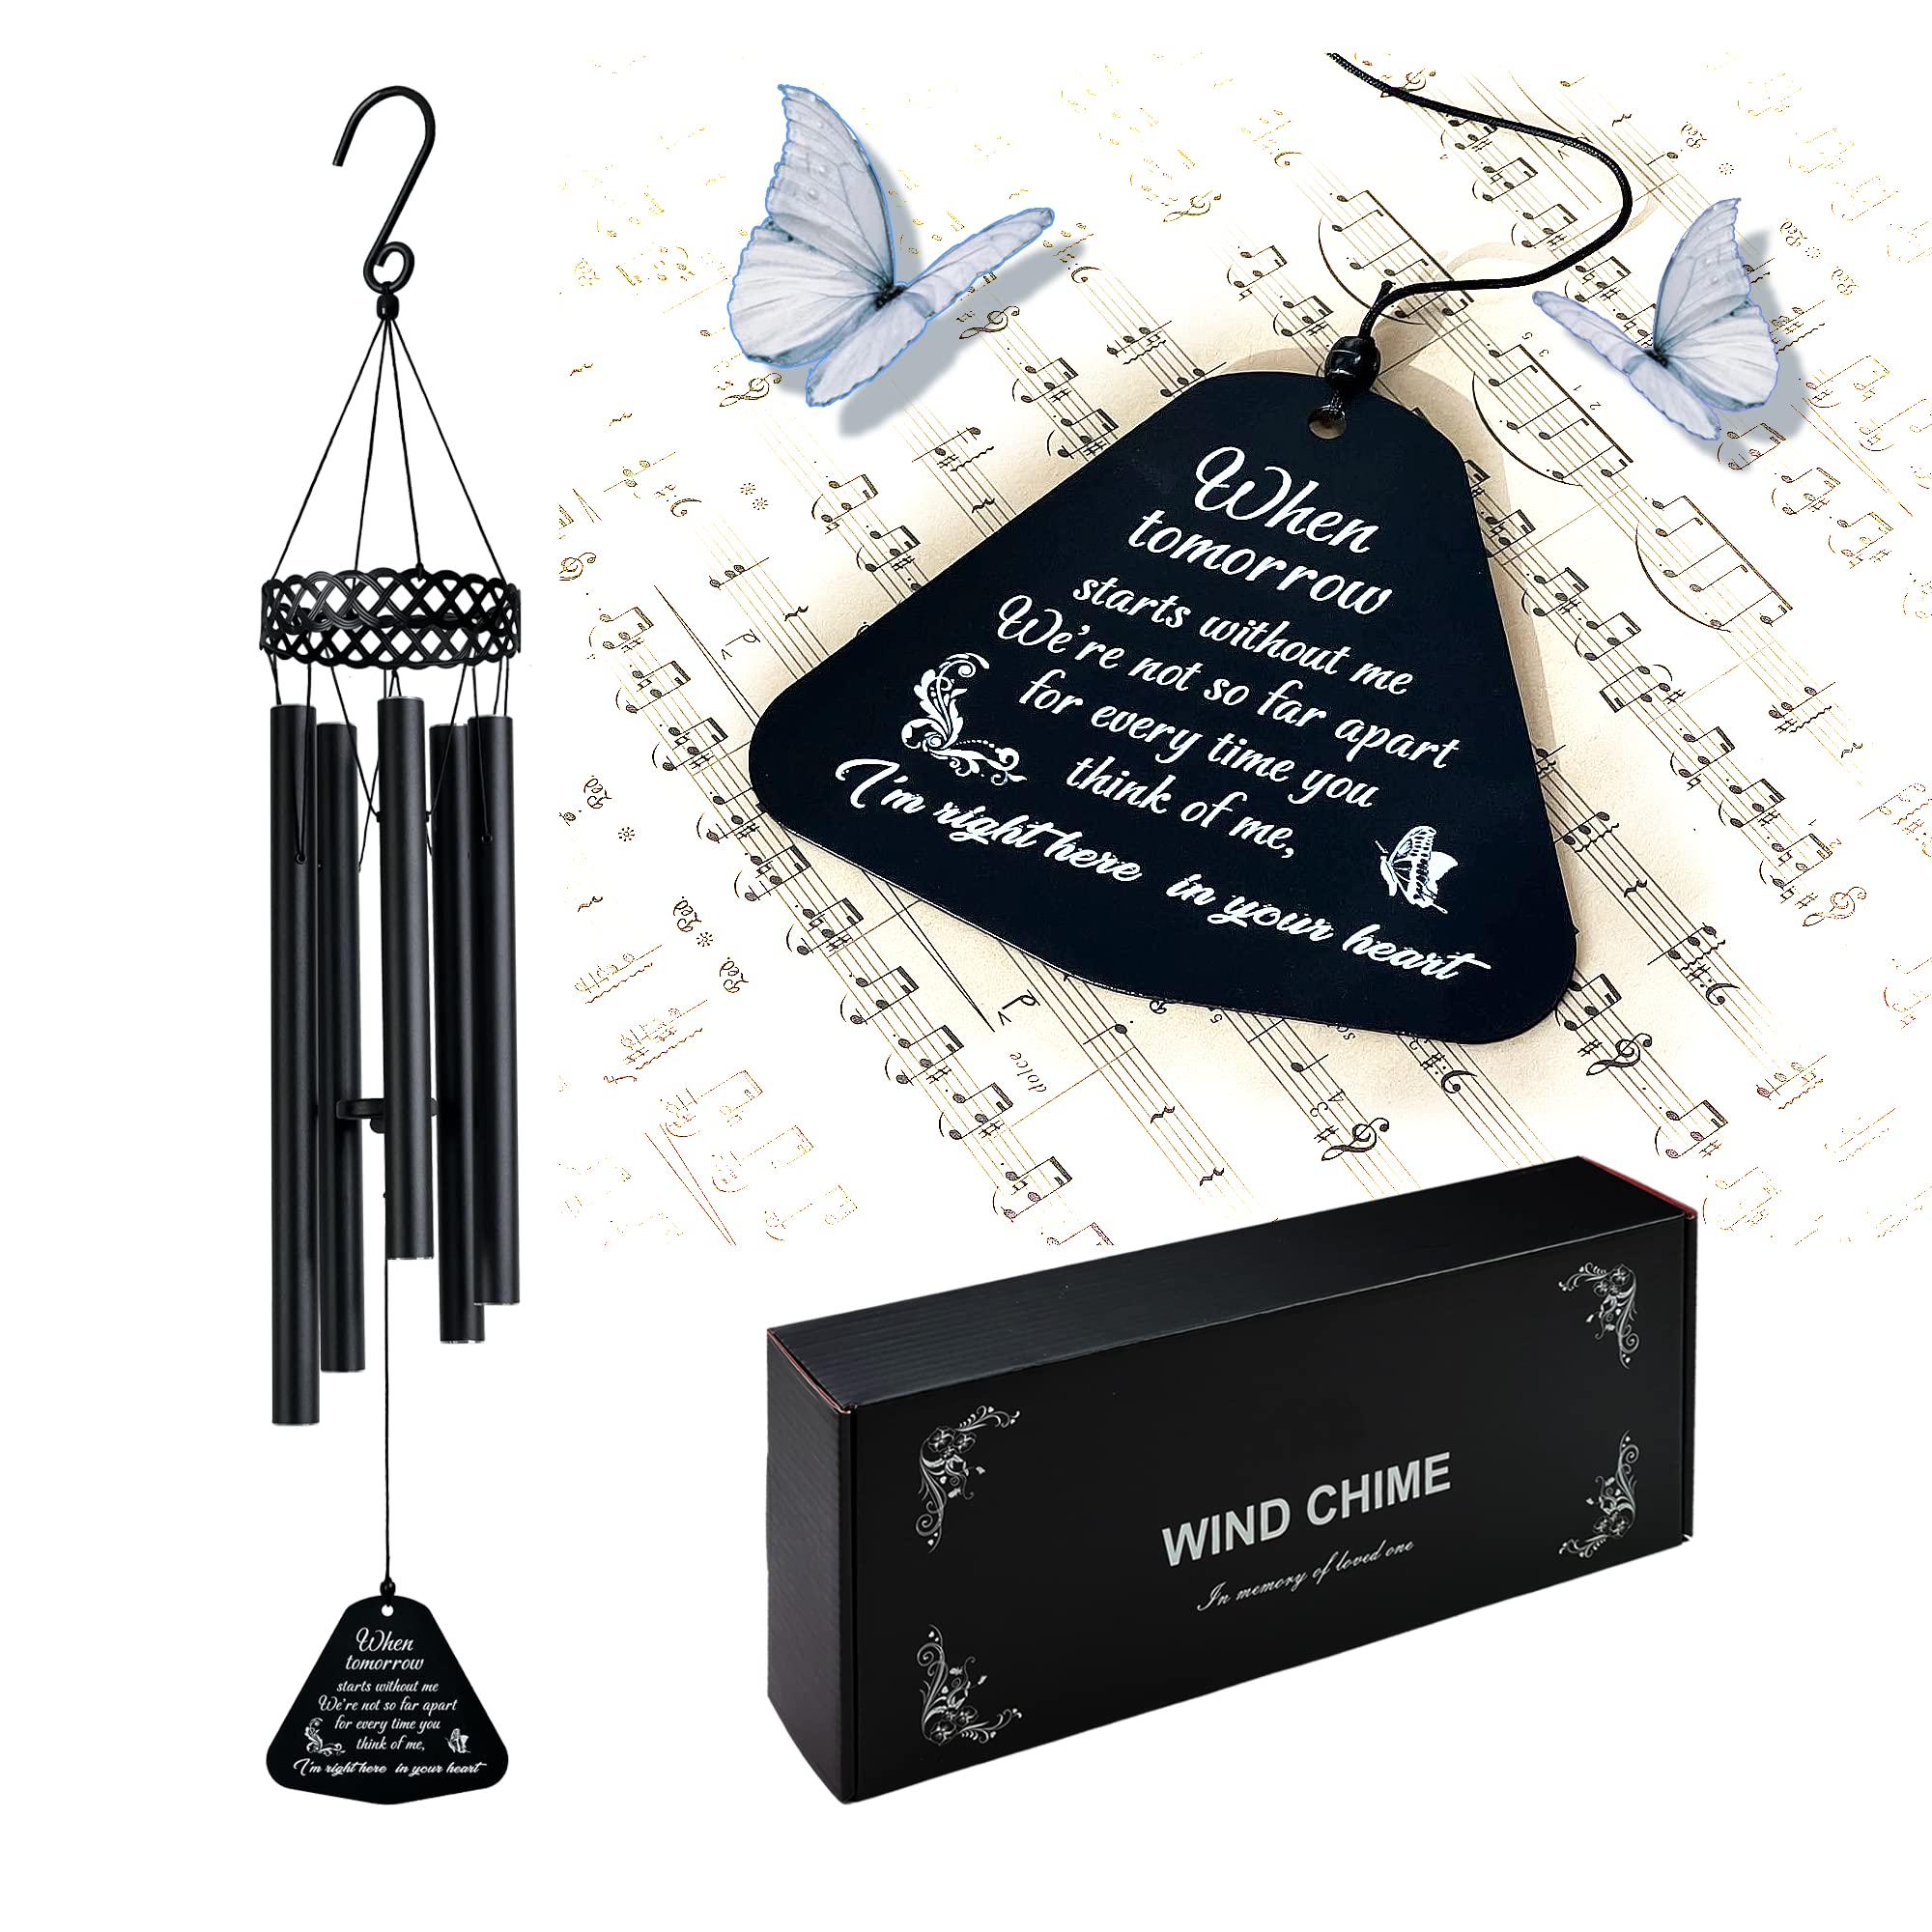 Unique Sympathy Bereavement Gifts Garden Memorial Metal Wind Chimes for Family Member